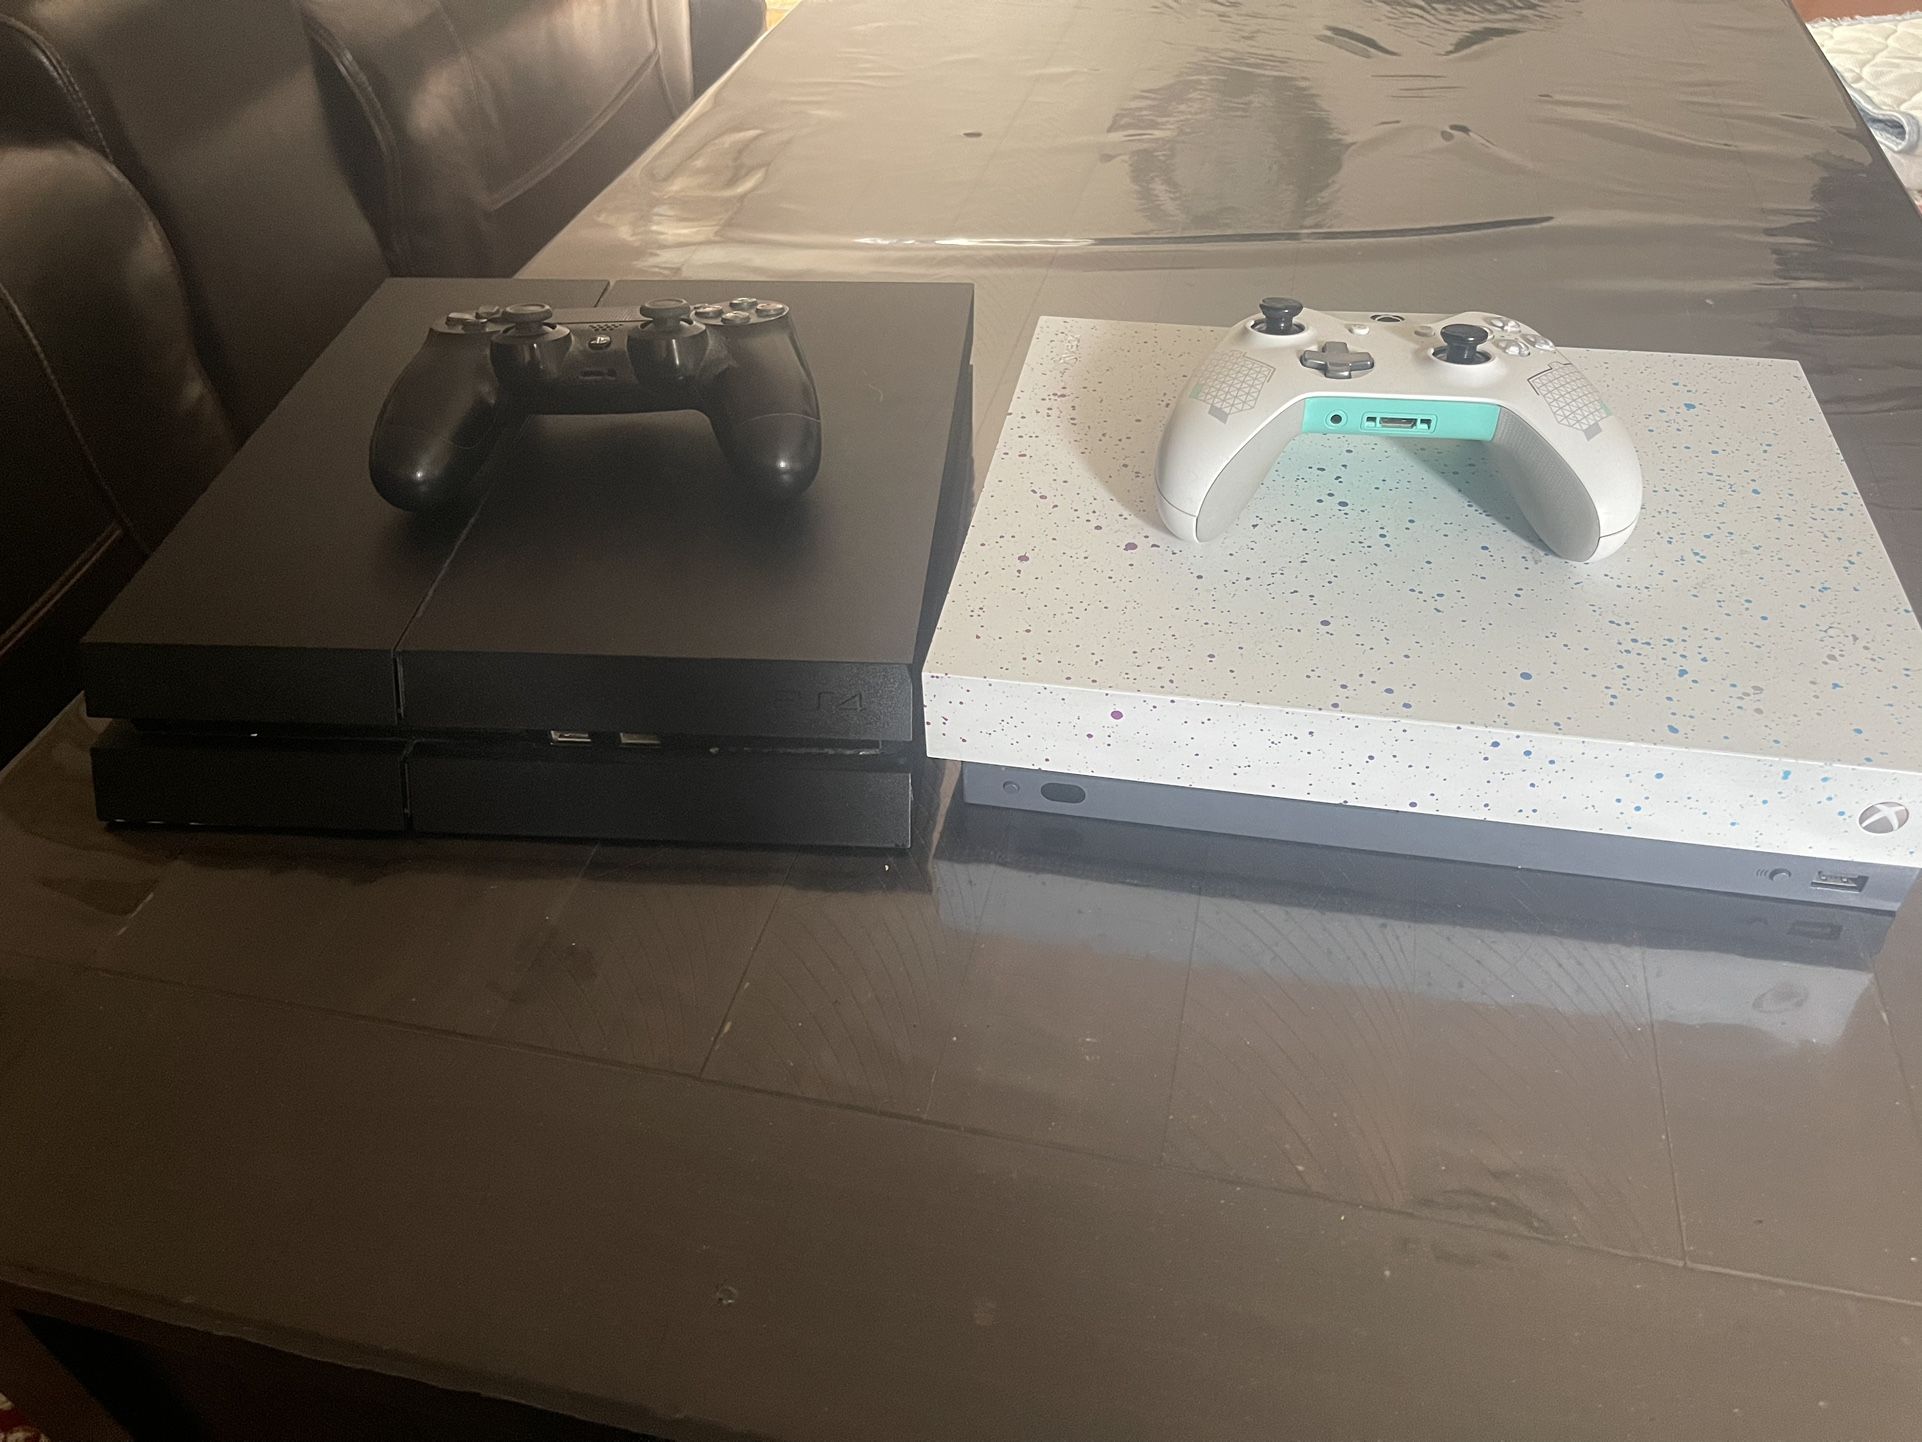 Xbox one and PS4 Consoles (WORKING)